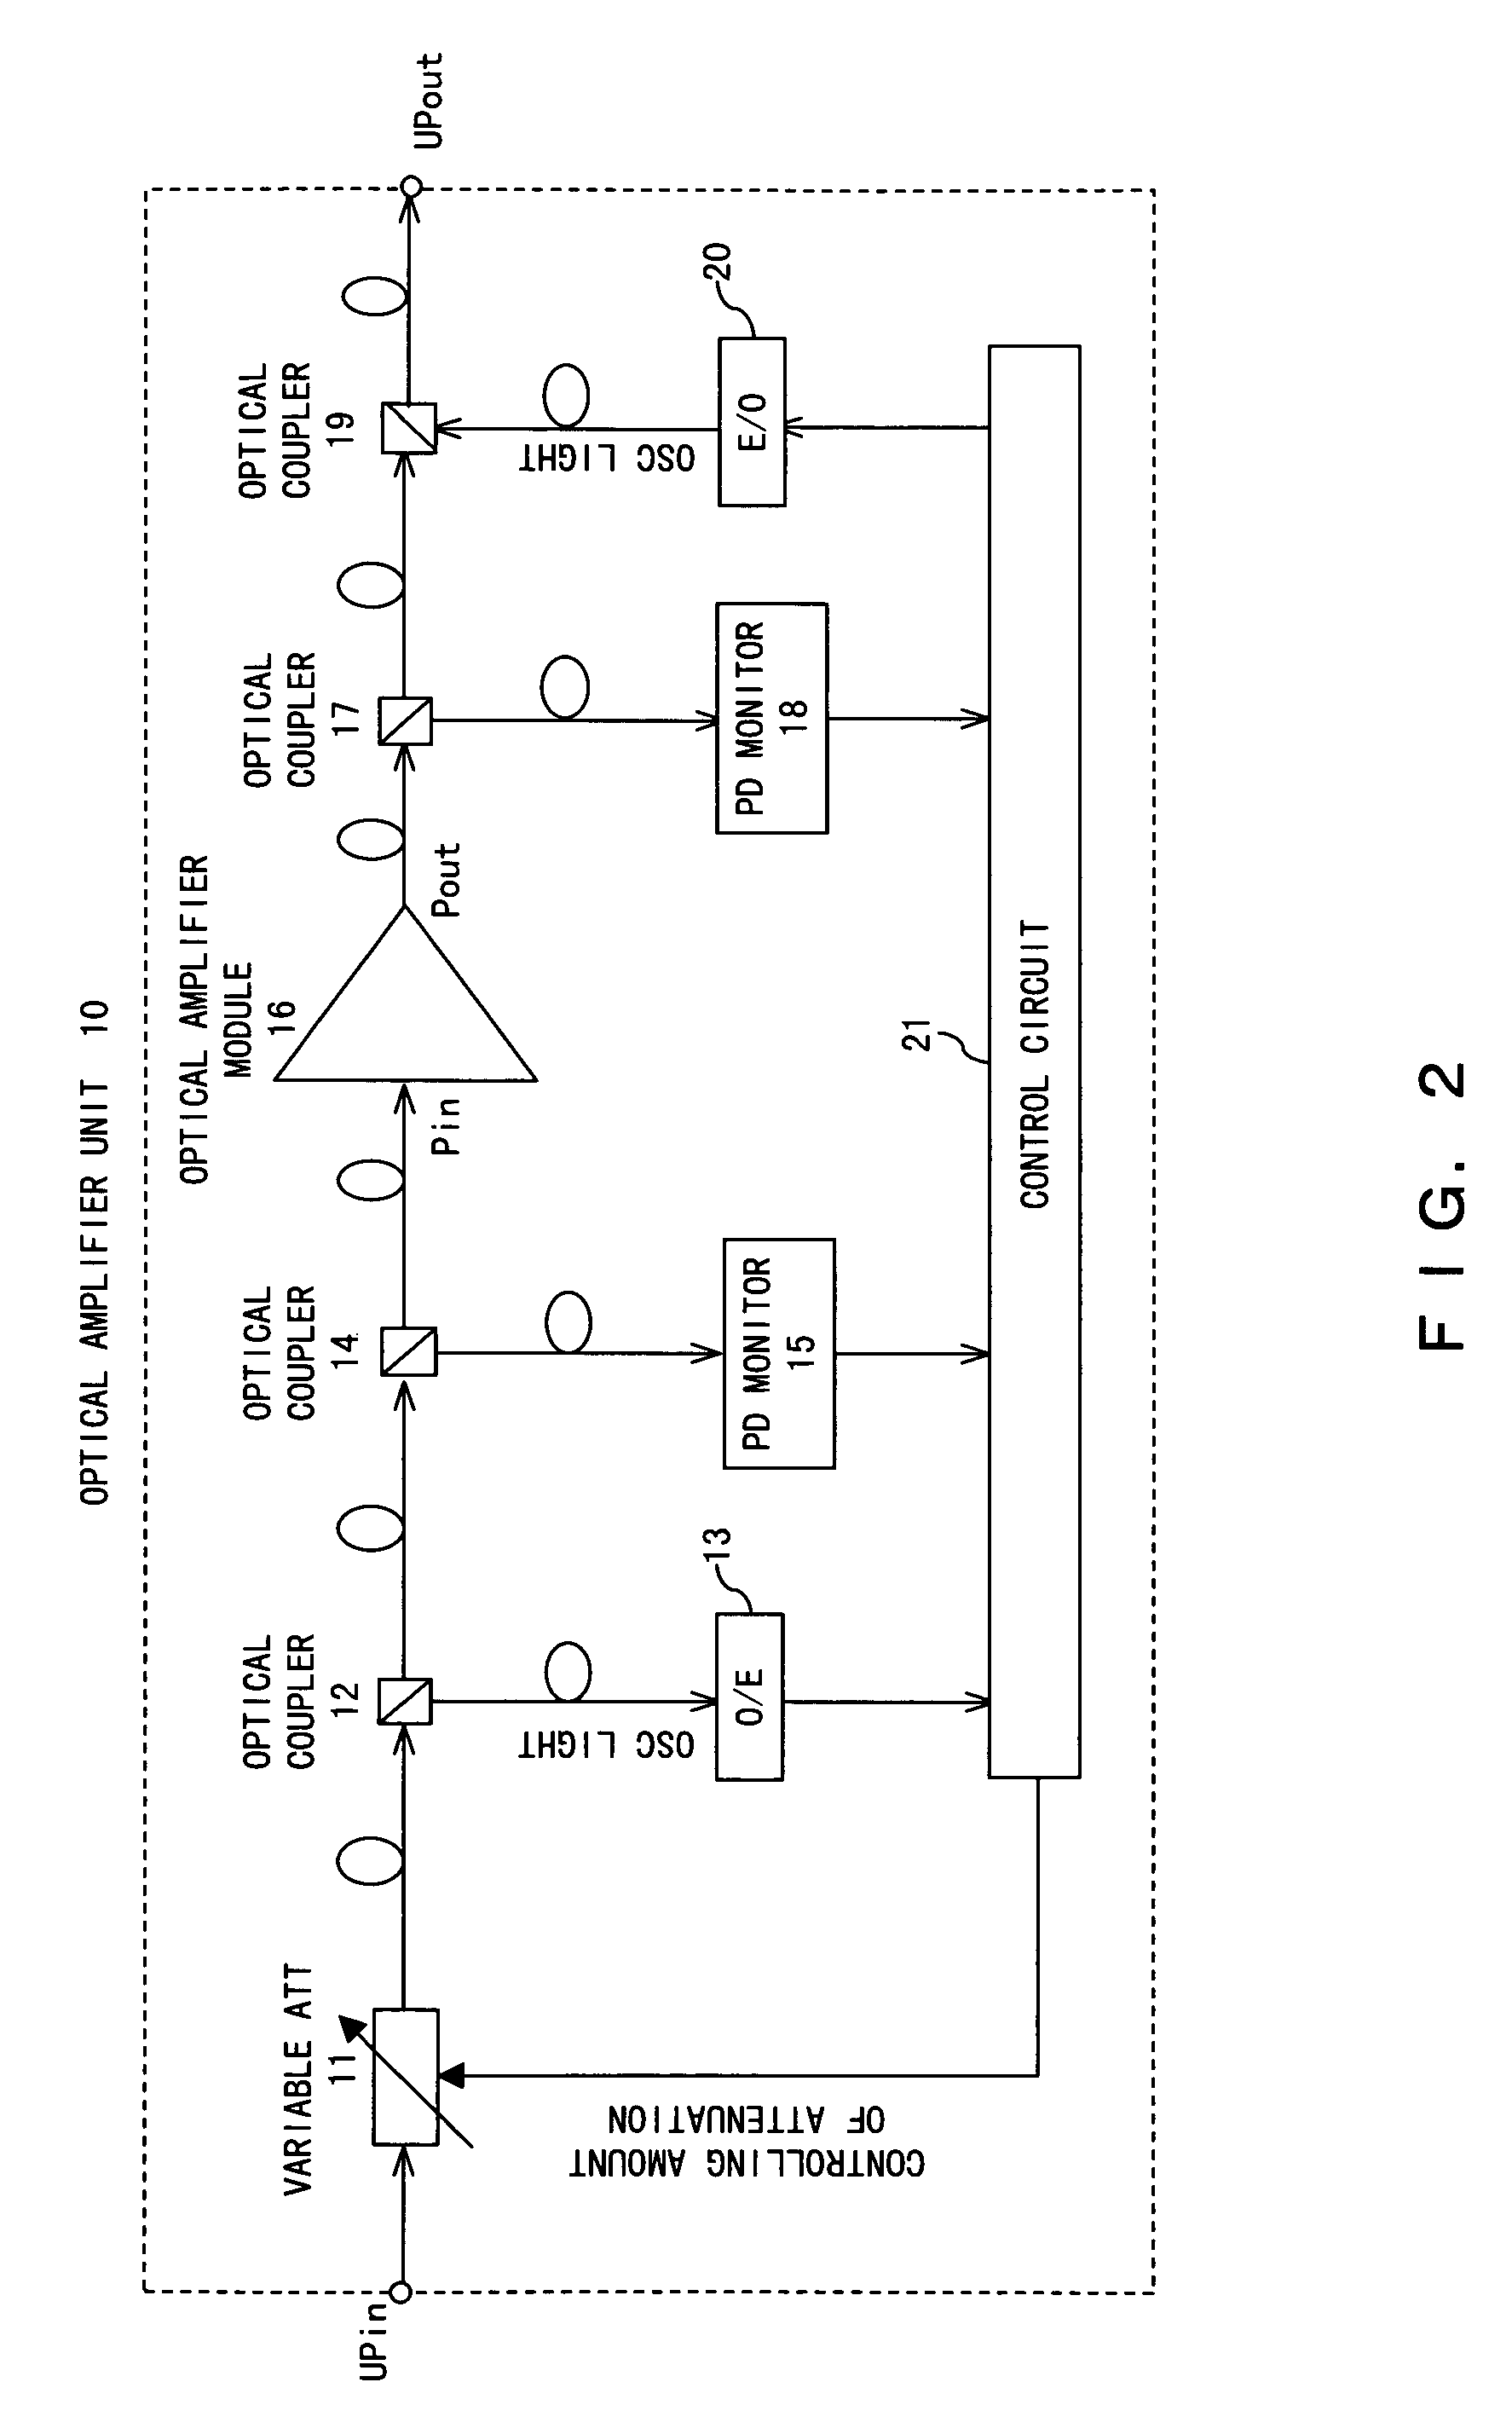 Optical transmission device using a wide input dynamic range optical amplifier